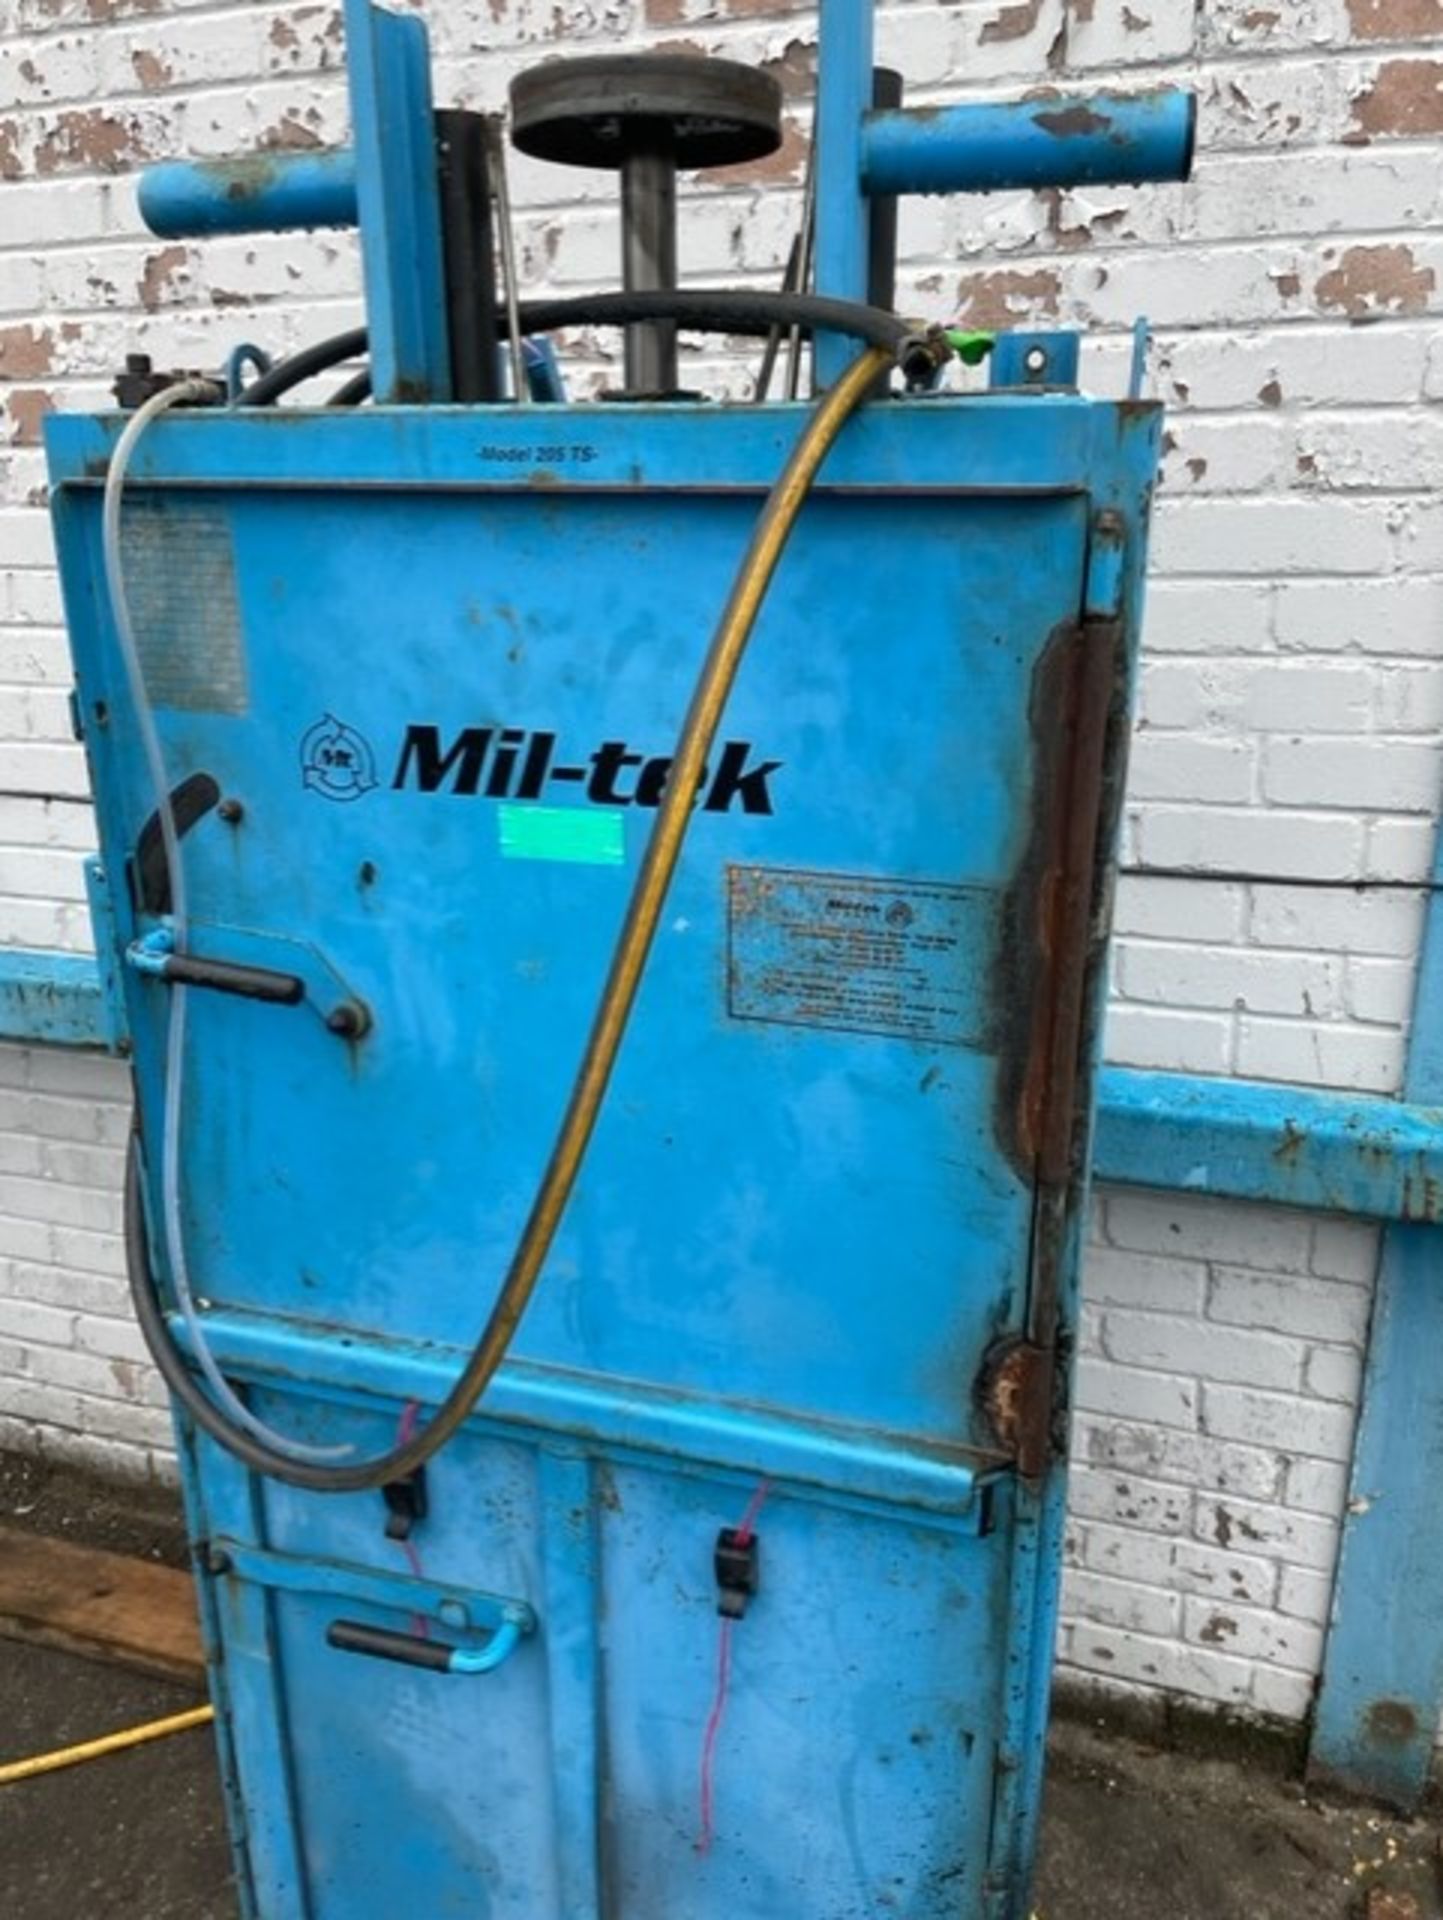 Miltek baler a205 model bales up to 100kg bales in need of new seal on the ram leaking with the - Image 2 of 5